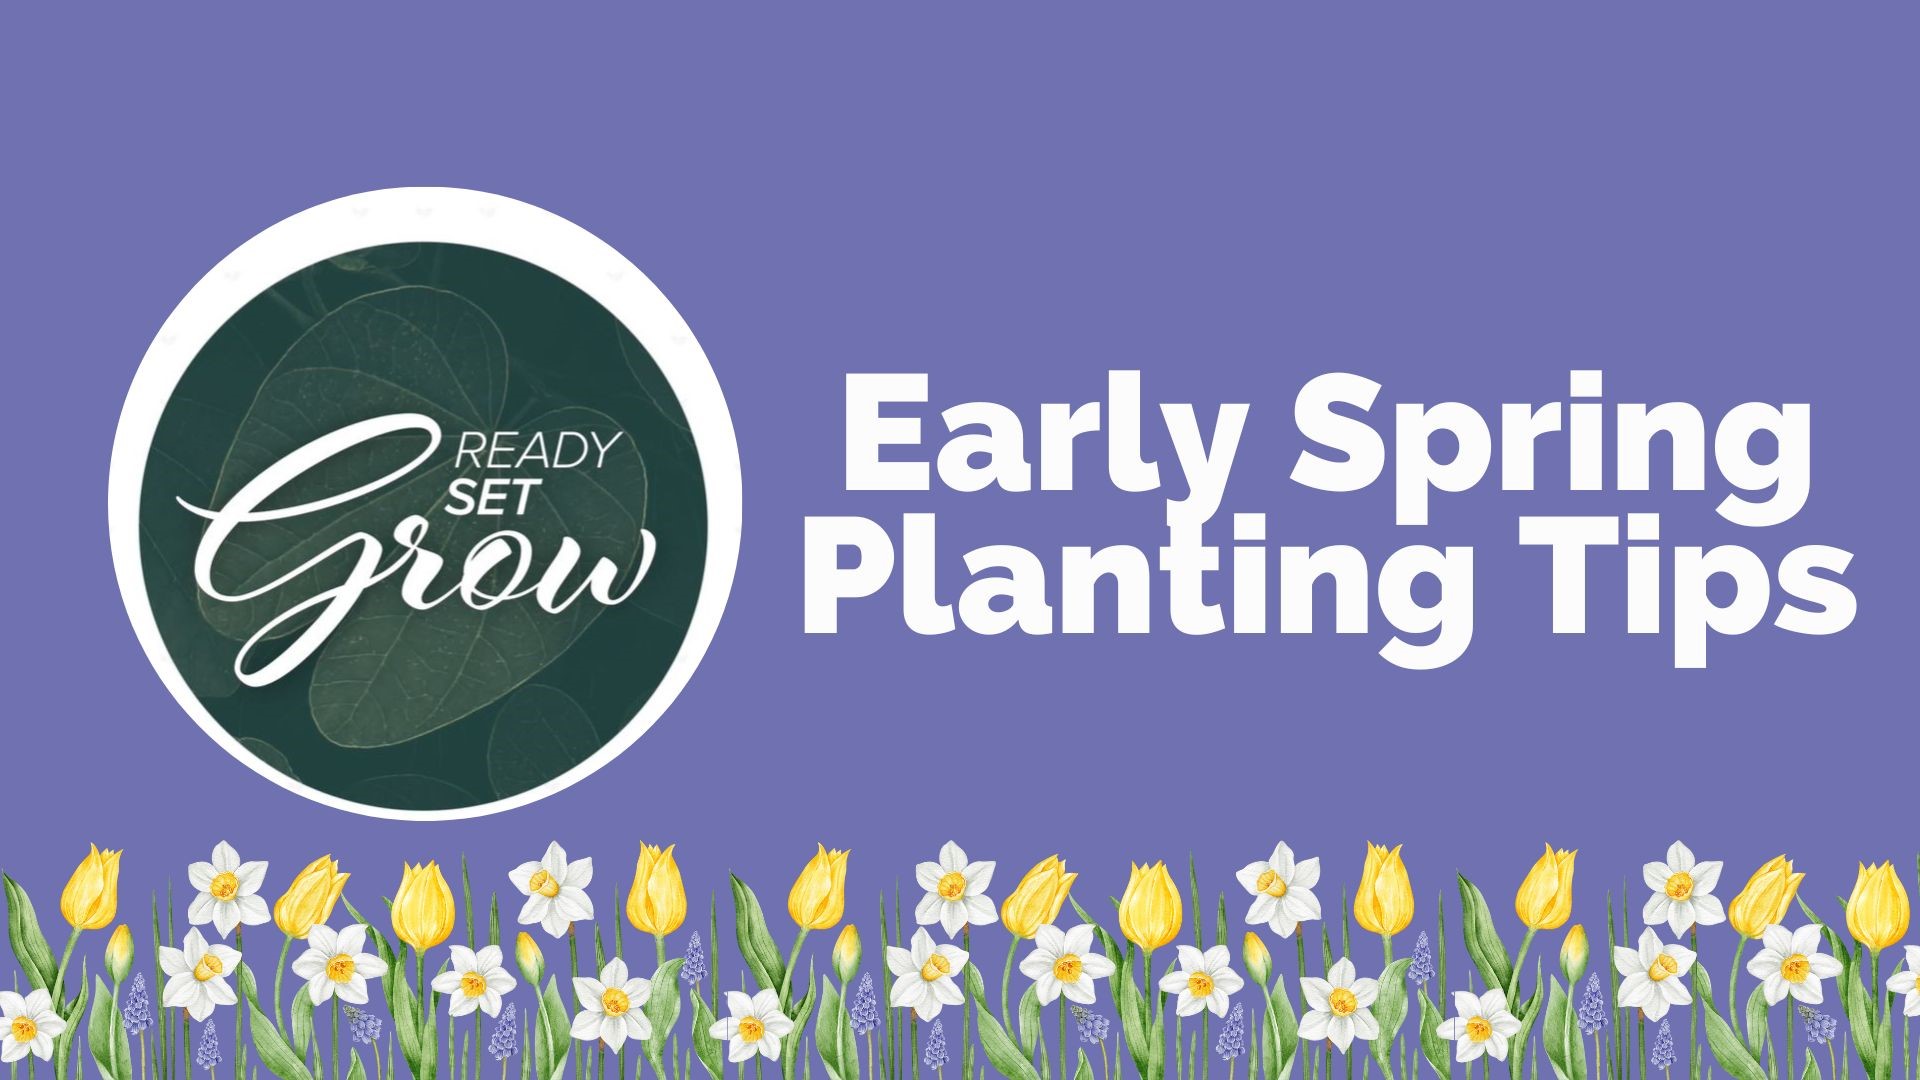 It is time to start thinking about your gardens and spring planting. How to get organized, plan for seed starting and even make your own planters.